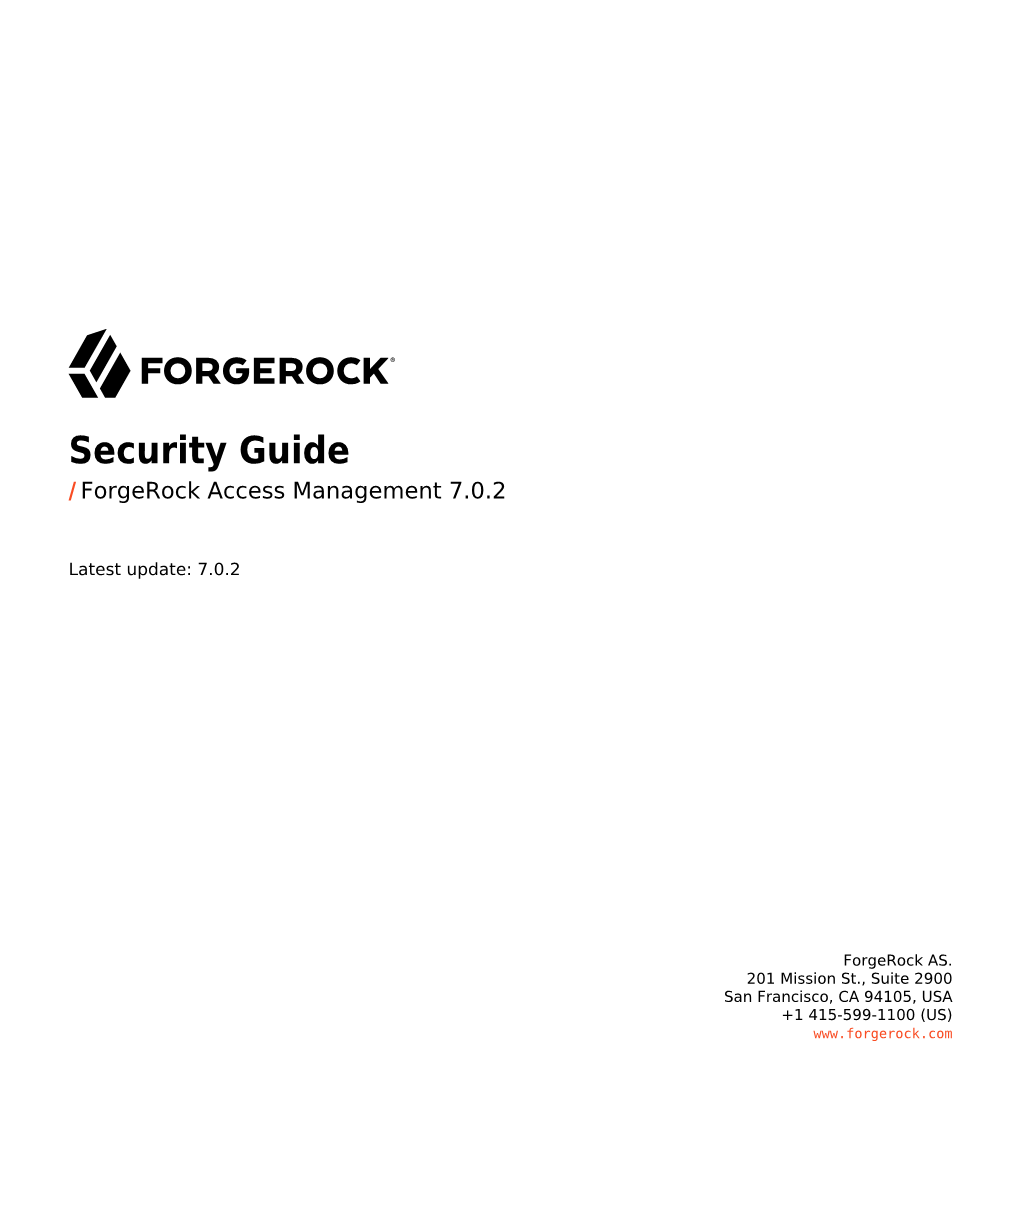 Security Guide / Forgerock Access Management 7.0.2